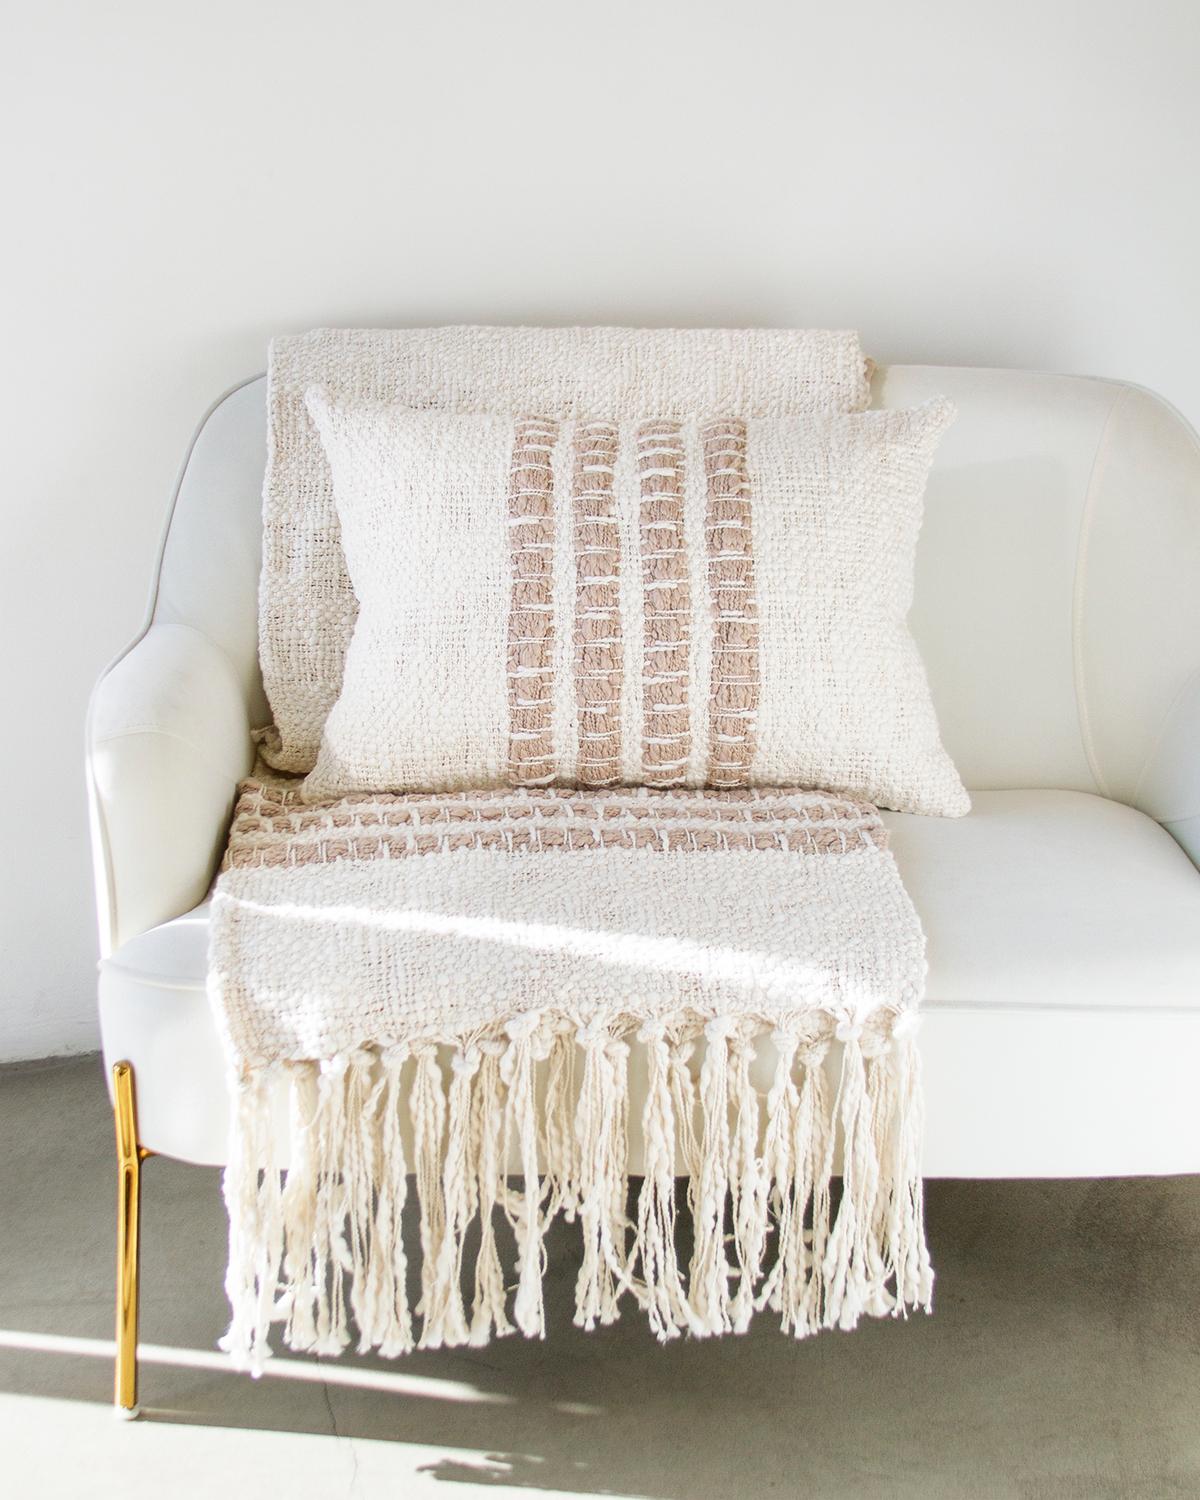 Rustic Miel White and Beige Textured Cotton Throw Blanket - Handmade For Sale